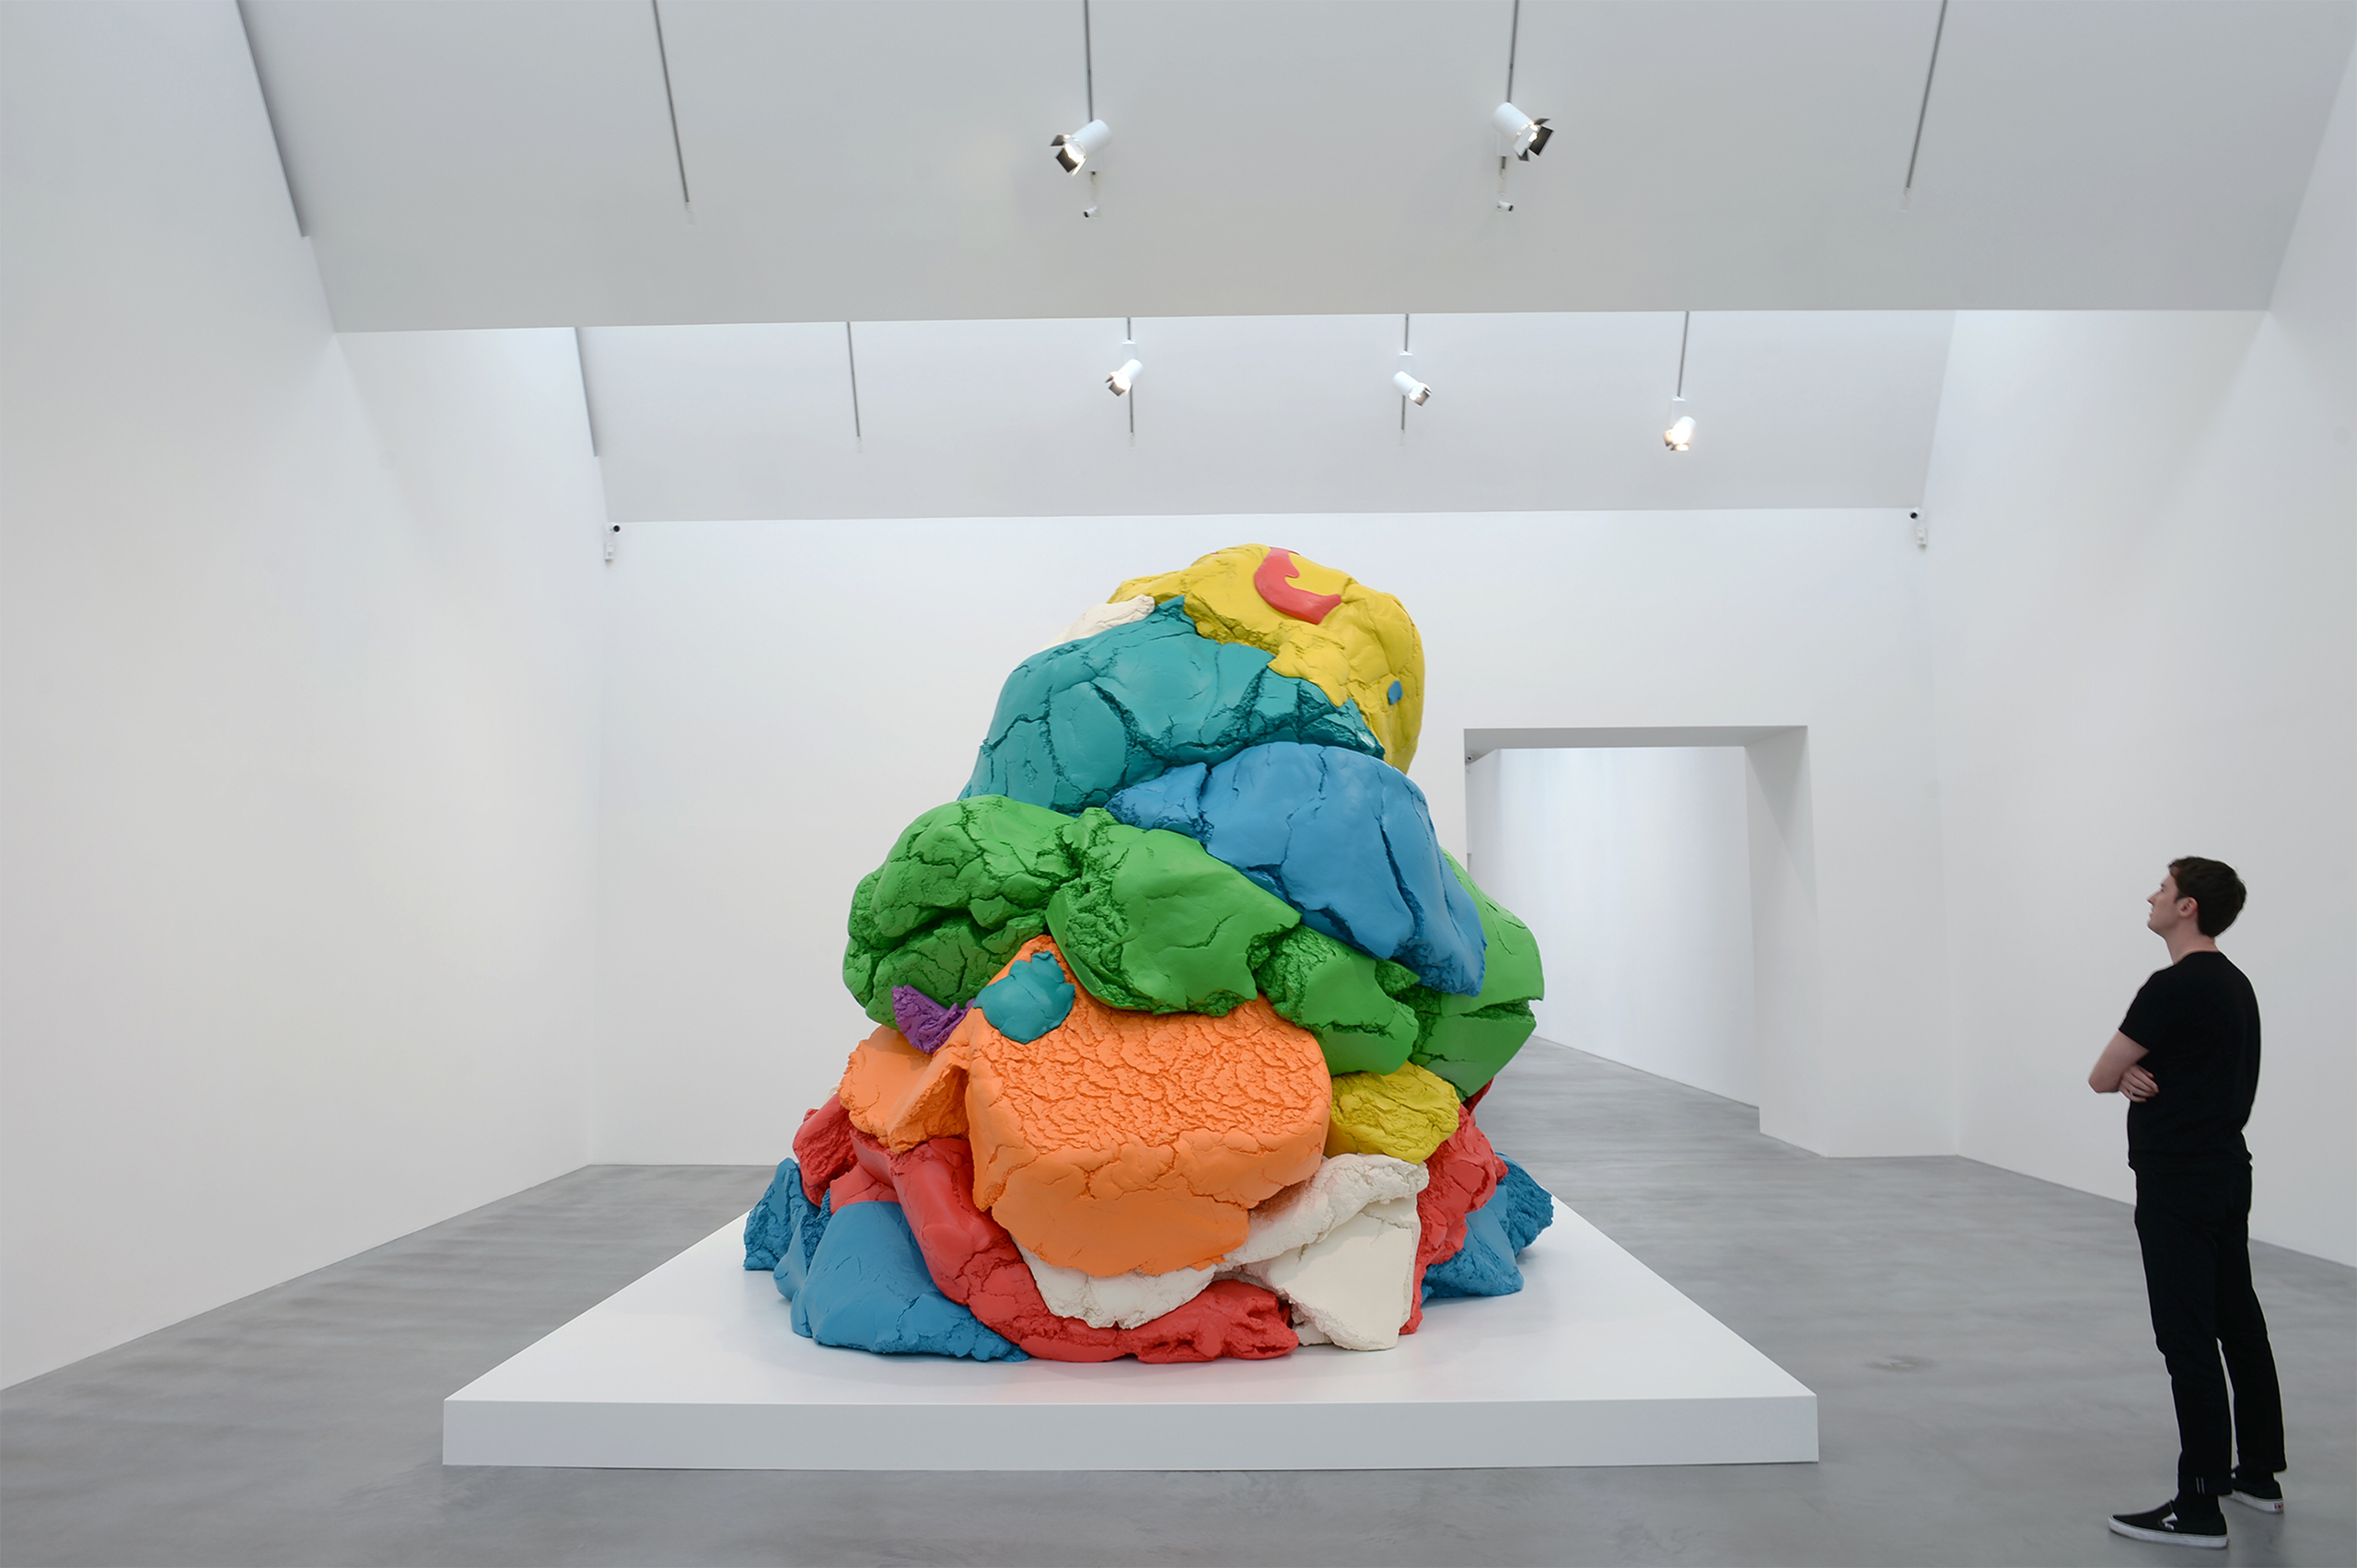 A man views Jeff Koons' sculpture "Play-Doh 1994-2014" during the opening of the Newport Street Gallery's new exhibition, "Jeff Koons: Now" in London, UK on May 17, 2016. (Anthony Devlin—PA Wire/AP)